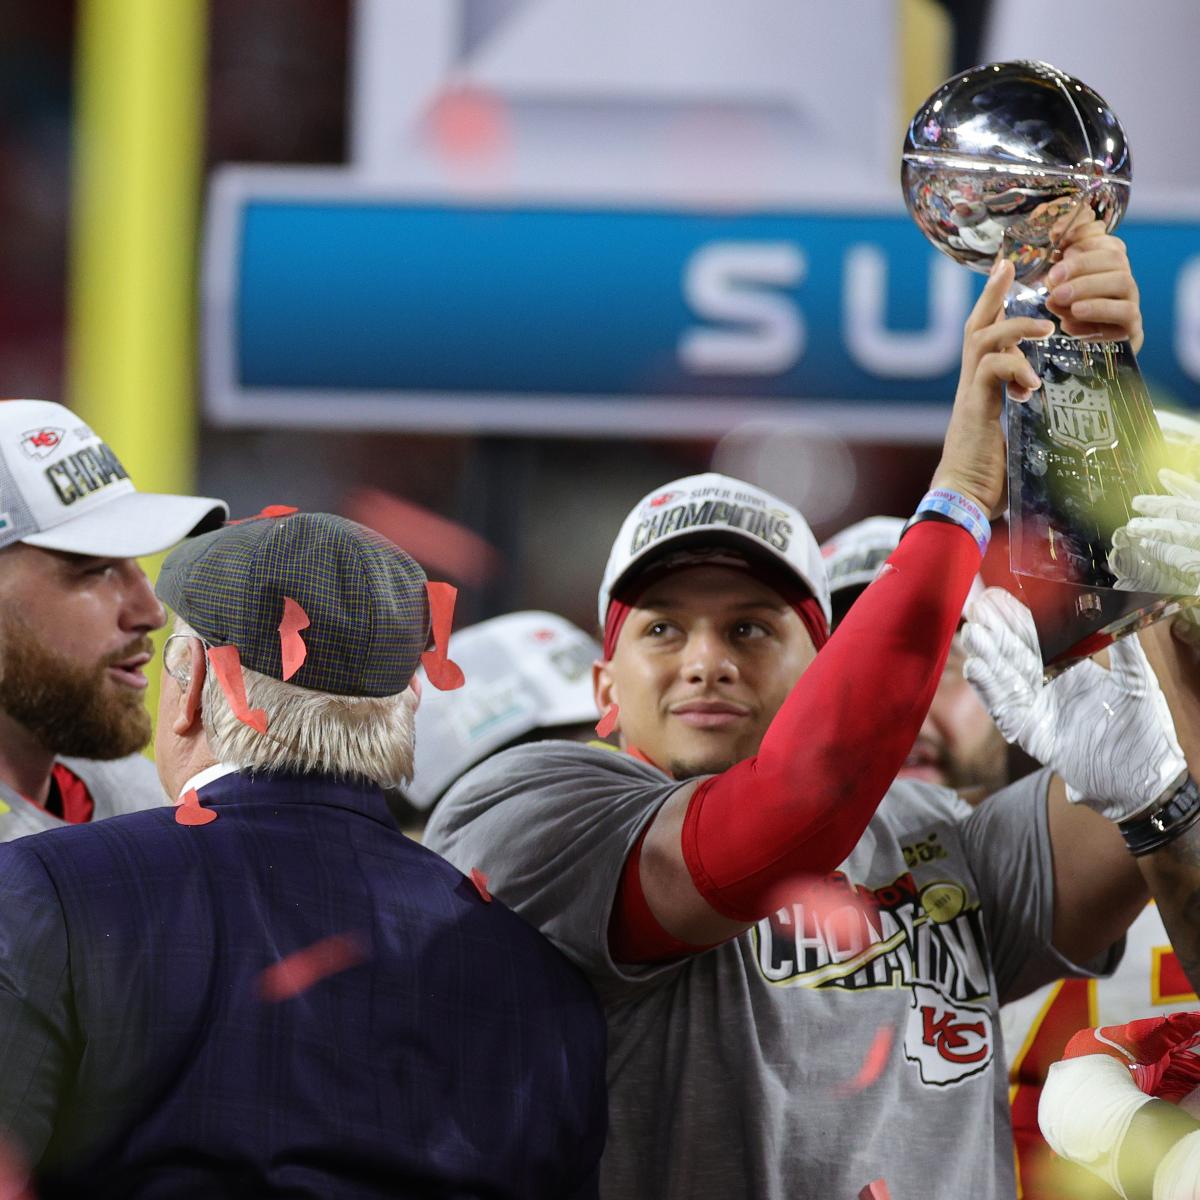 Chiefs Parade 2020: Live Stream, TV Schedule and Weather Forecast | Bleacher Report ...